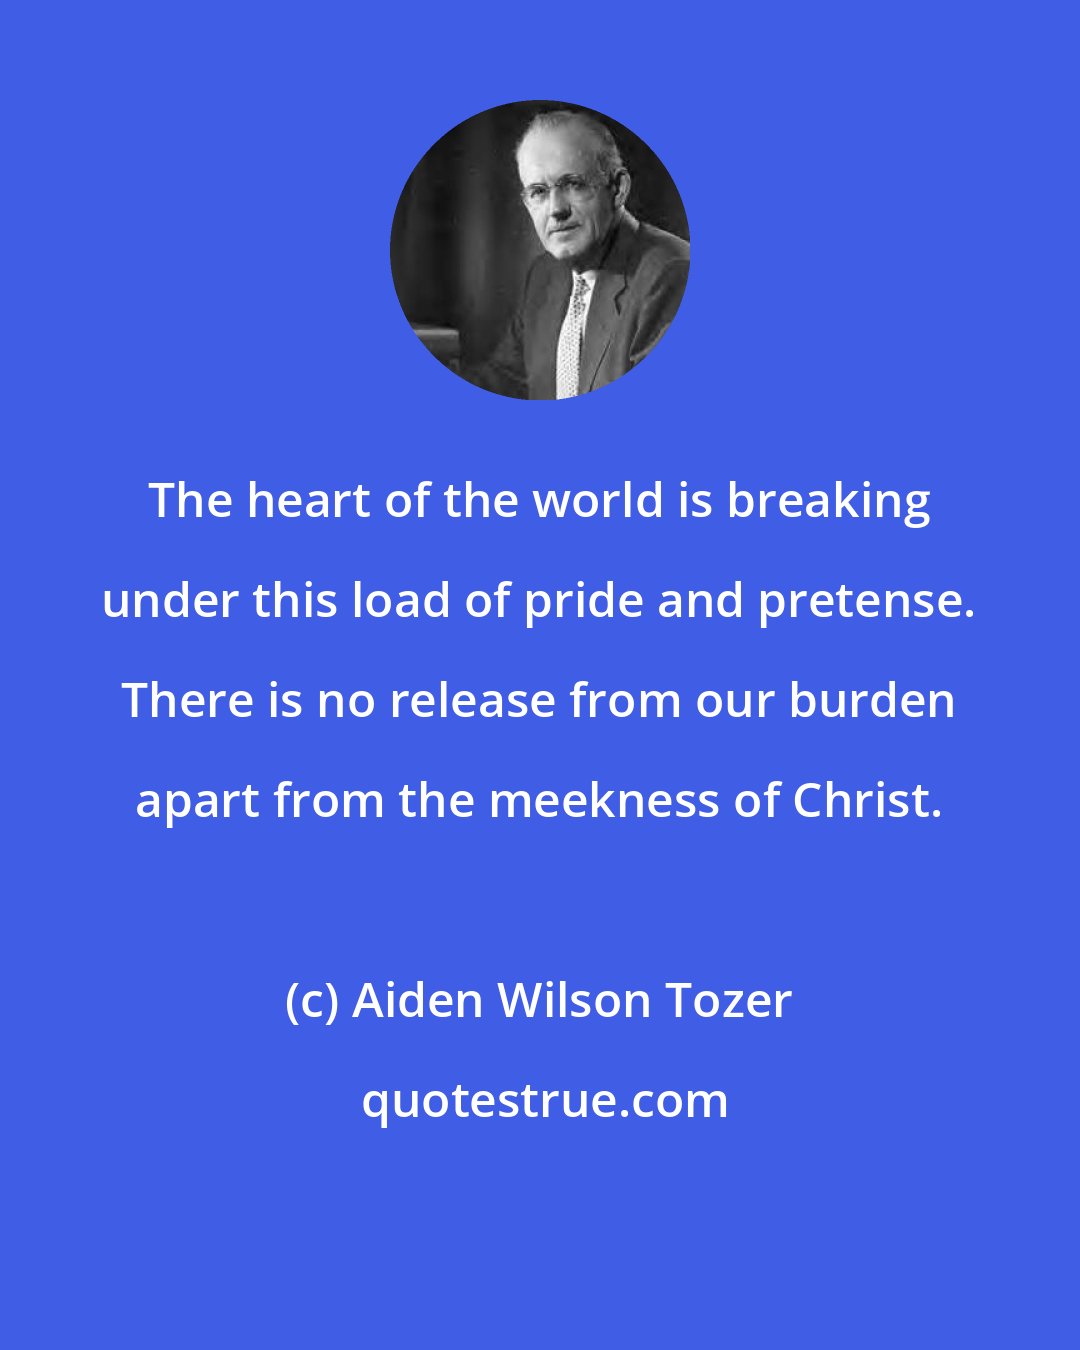 Aiden Wilson Tozer: The heart of the world is breaking under this load of pride and pretense. There is no release from our burden apart from the meekness of Christ.